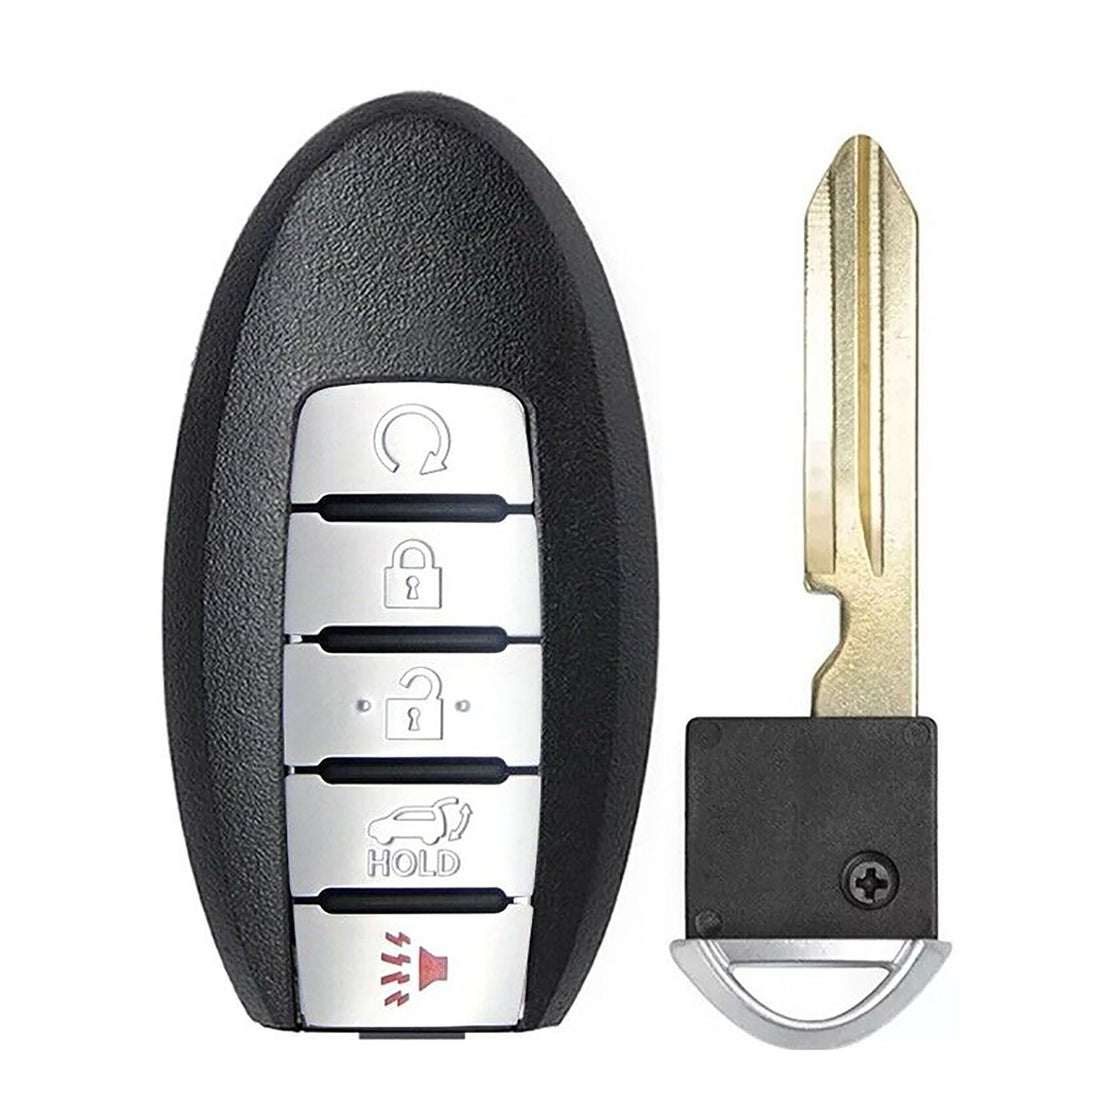 1x New Replacement Proximity Key Fob Compatible with & Fit For 2017 2018 Nissan Rogue - MPN S180144110-02